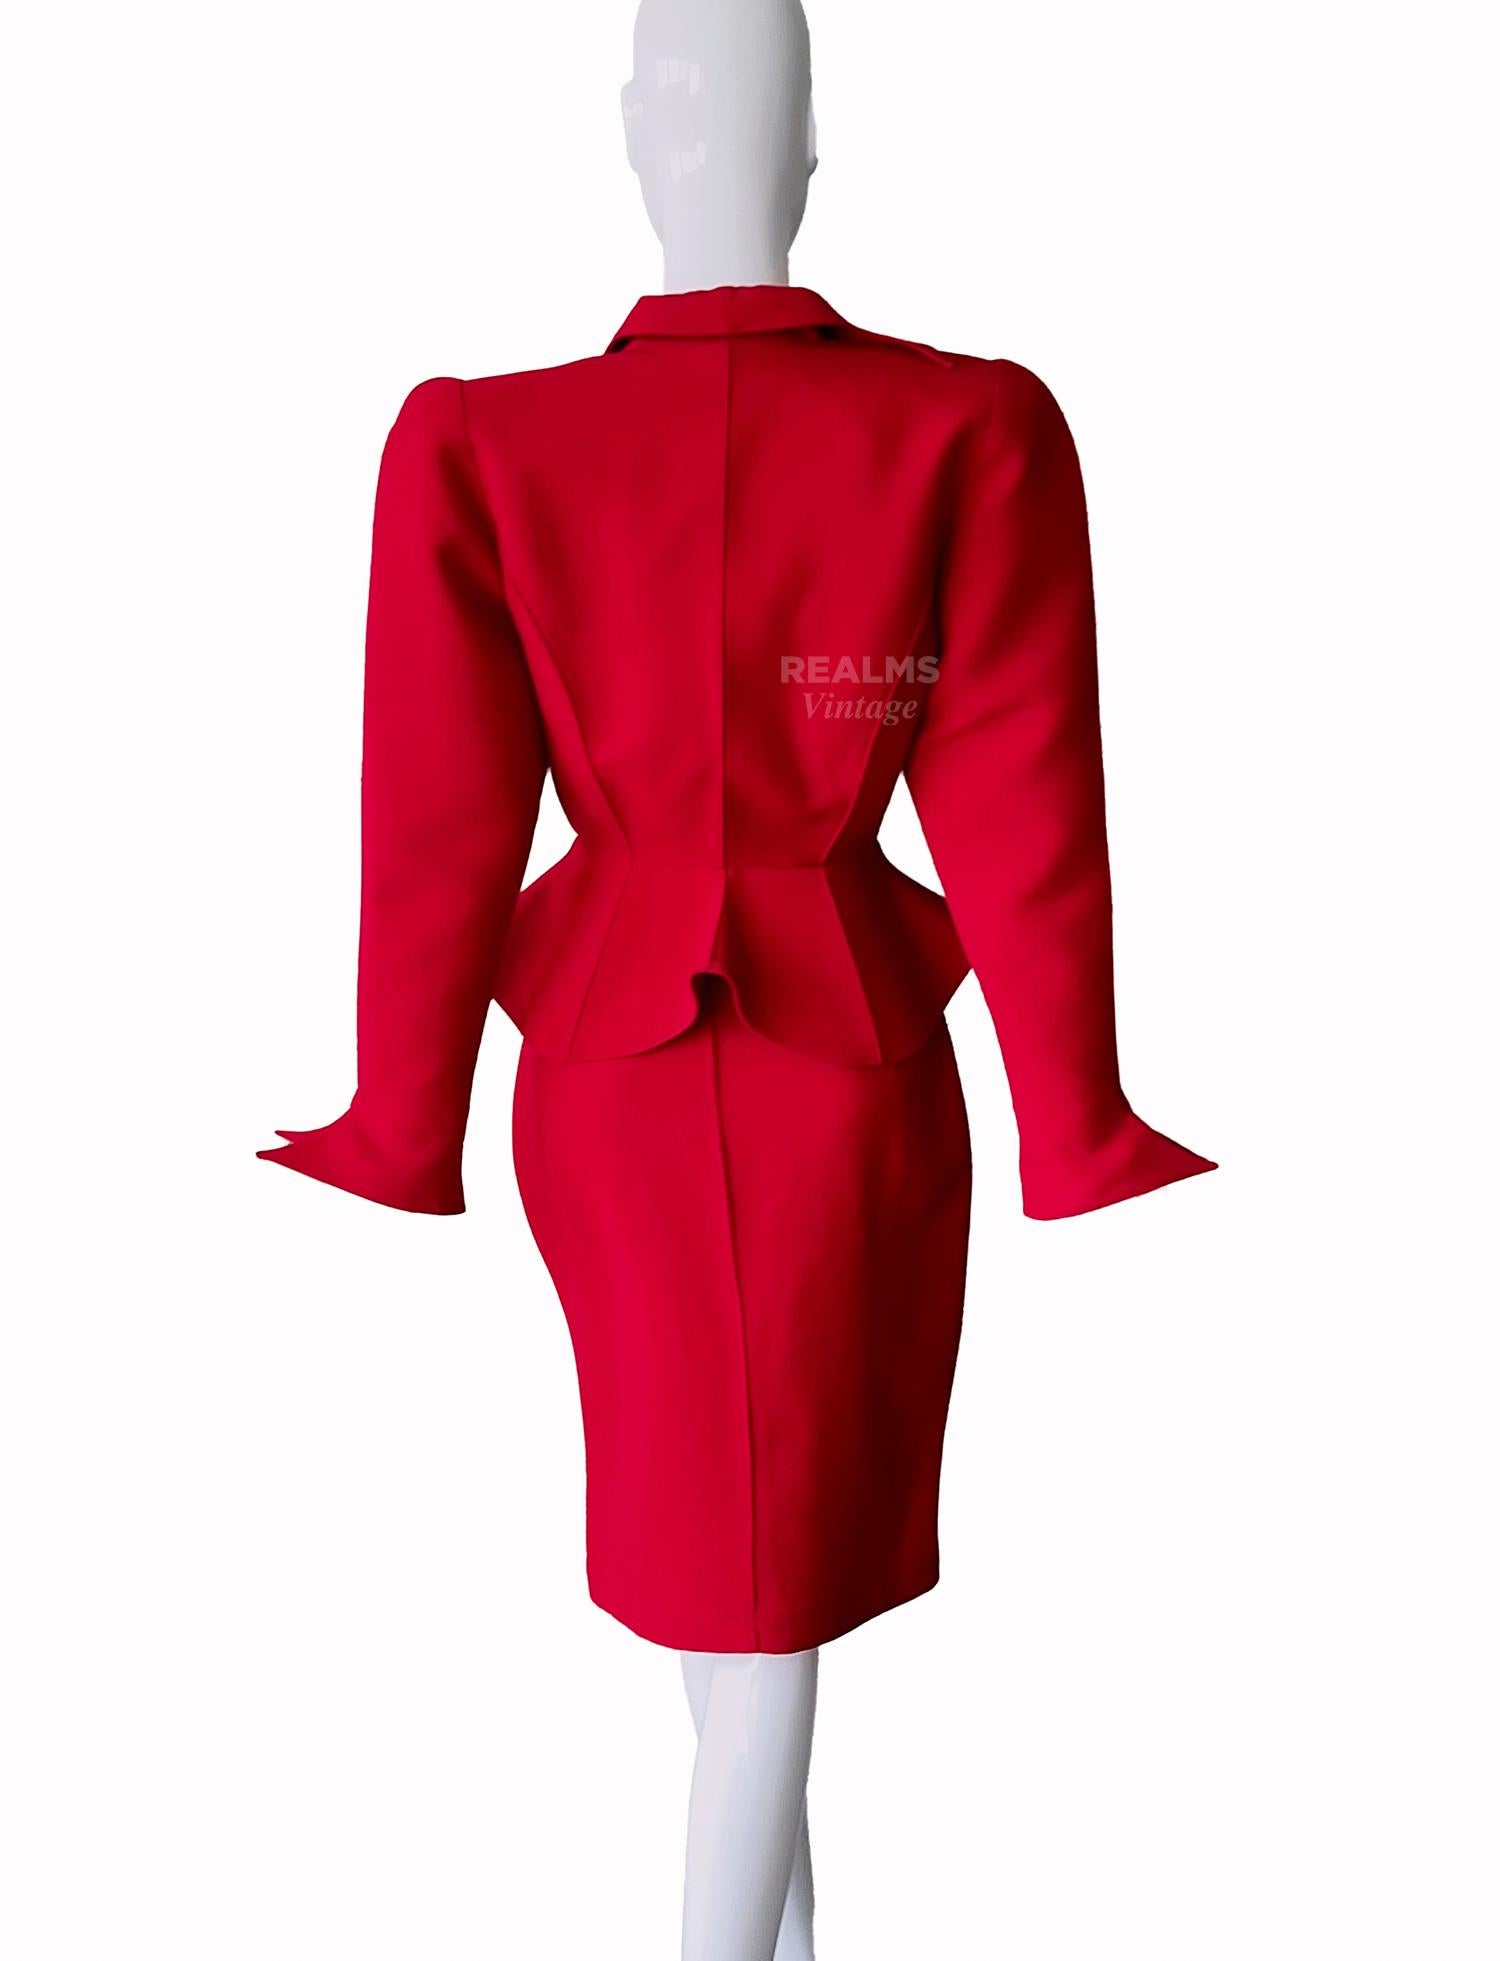 The Iconic red Thierry Mugler LES INFERNALES Suit 1988/89 For Sale 4